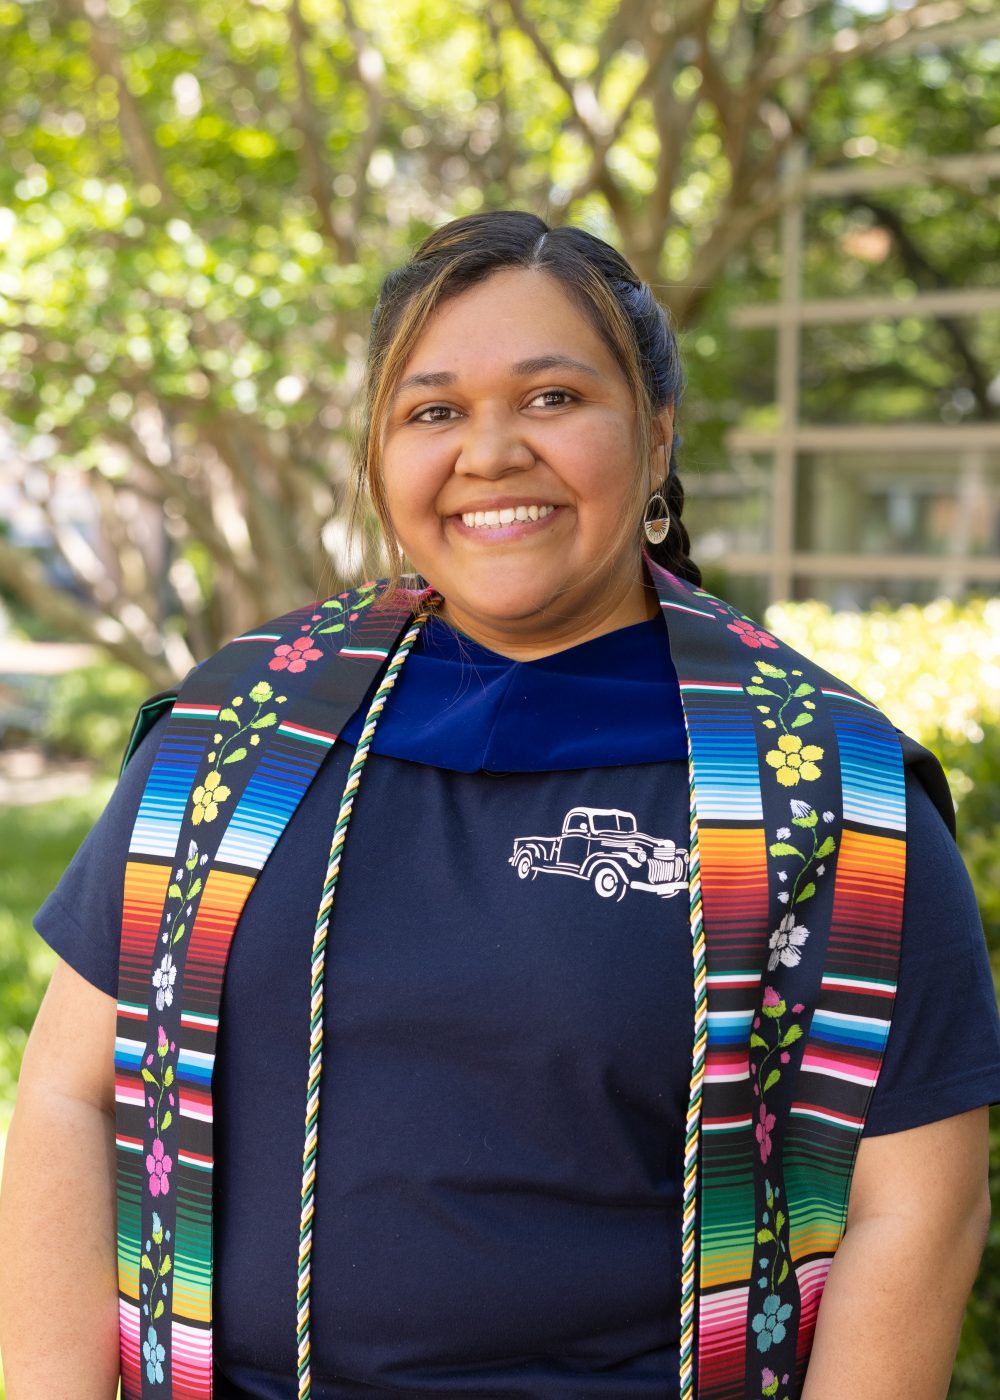 Yelixza Avila wears a shirt with an image of a 1941 pickup truck, under her graduation stole, hood and cord.